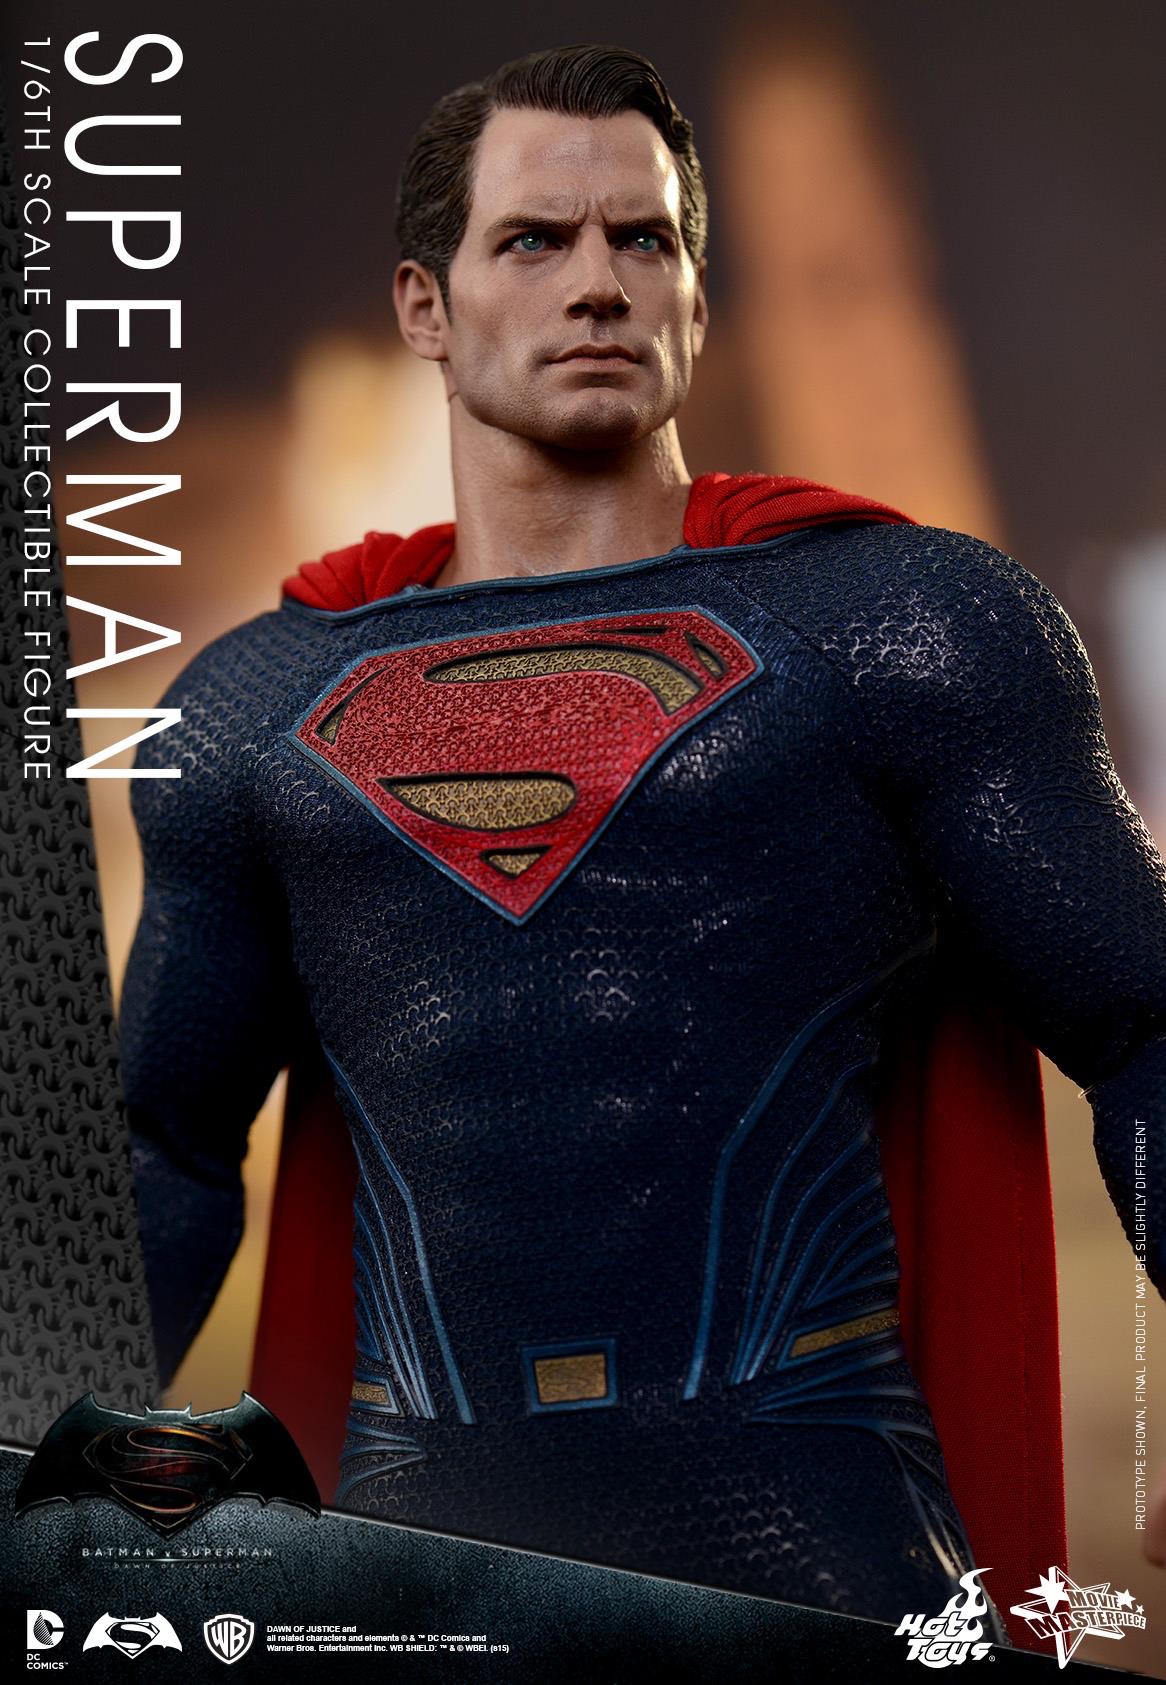 151215-HotToys-Sup14.html